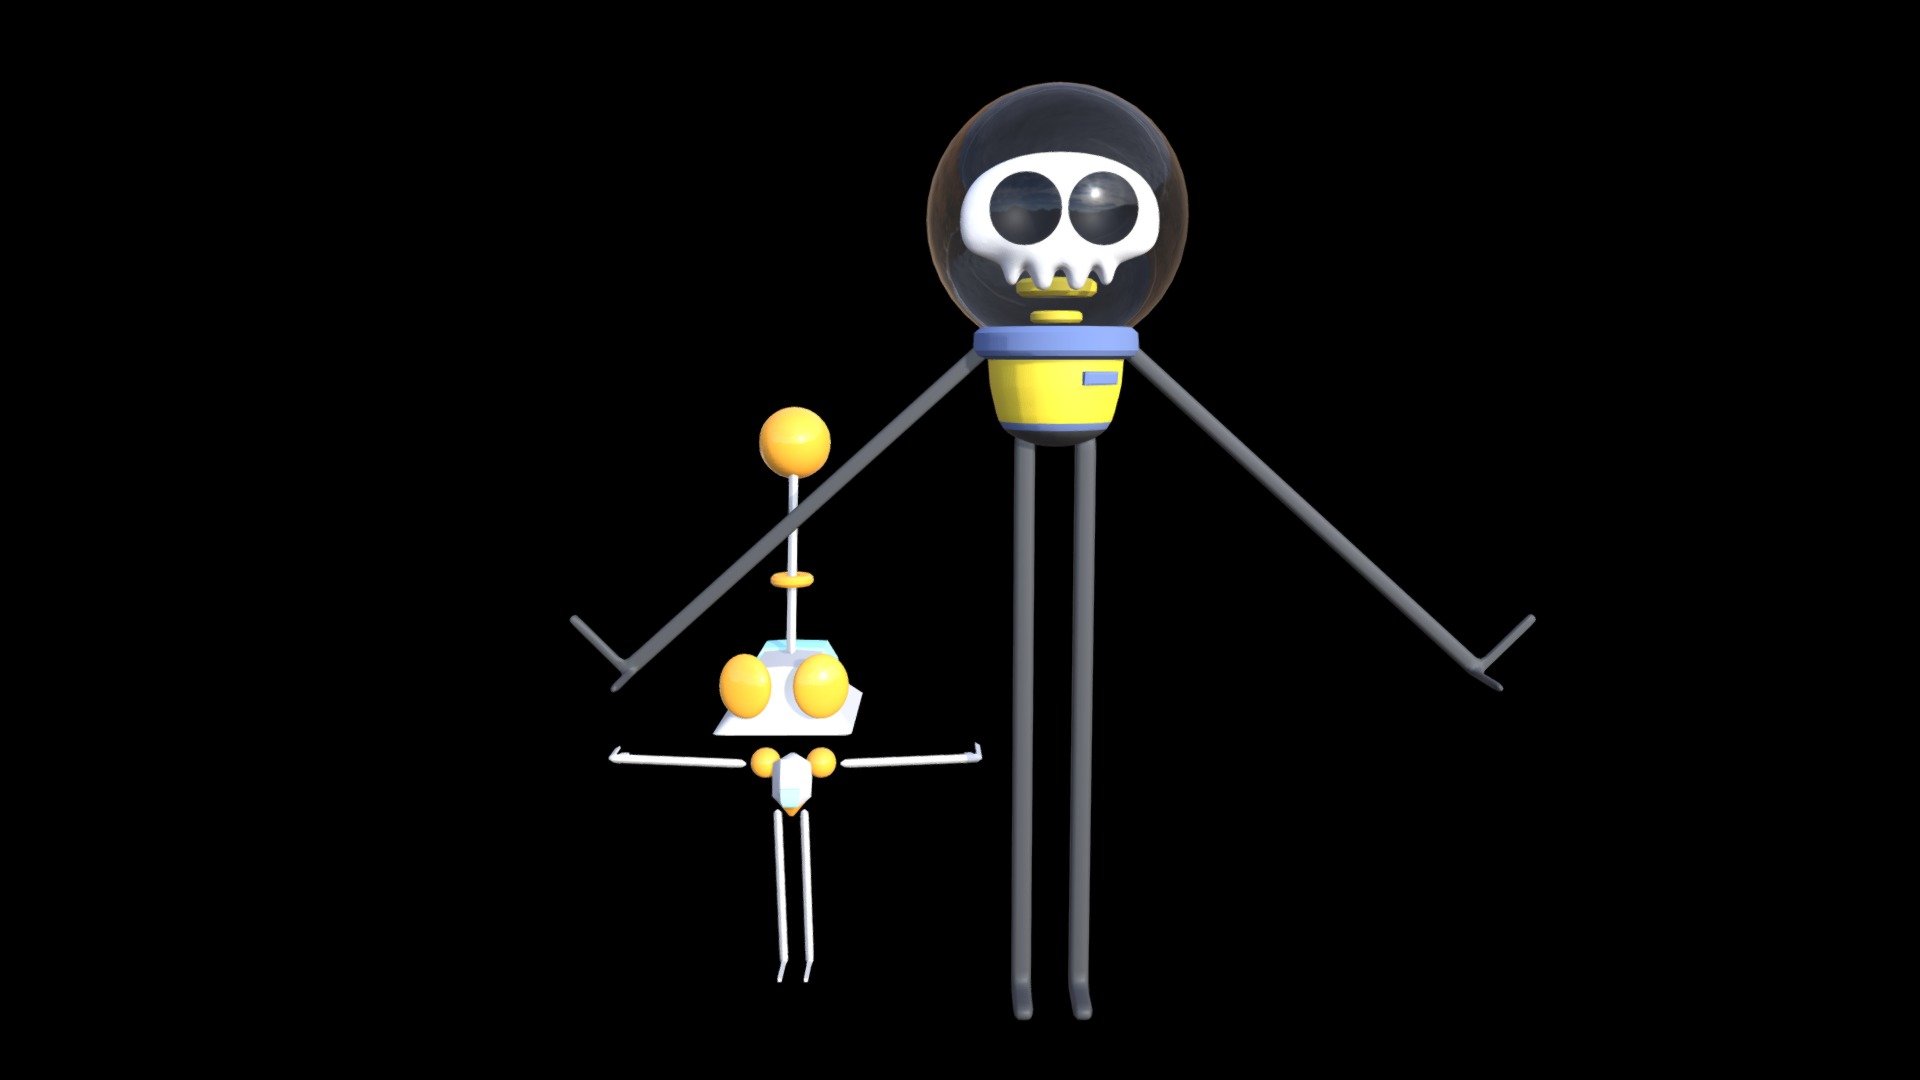 Skeleton &amp; Robot Characters
Bad topology on the skeleton's head&hellip; Otherwise, not too bad 3d model